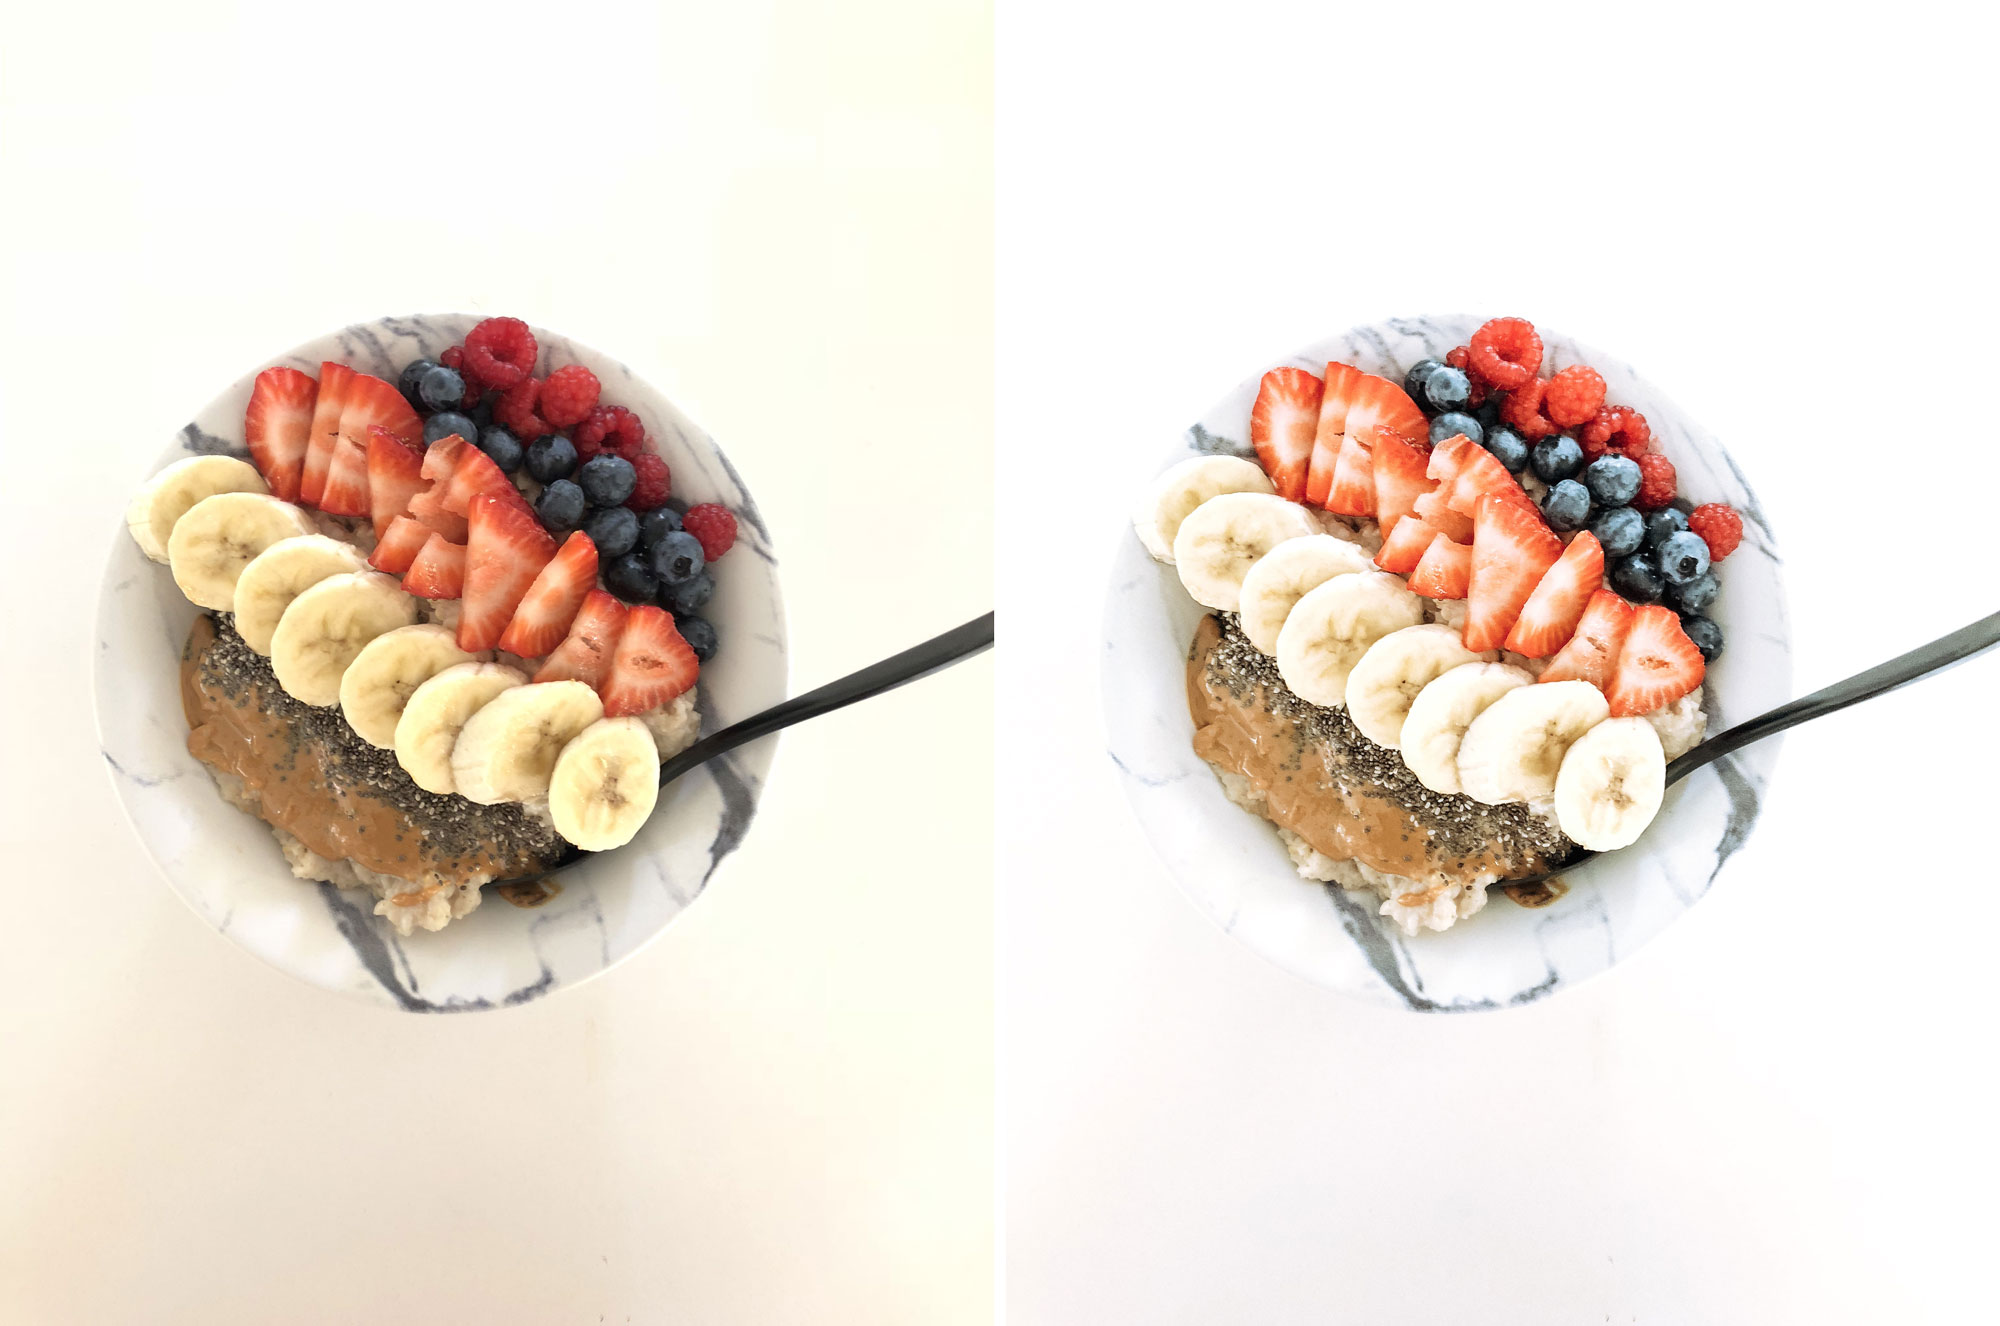 fruit-salad-before-and-after.jpg